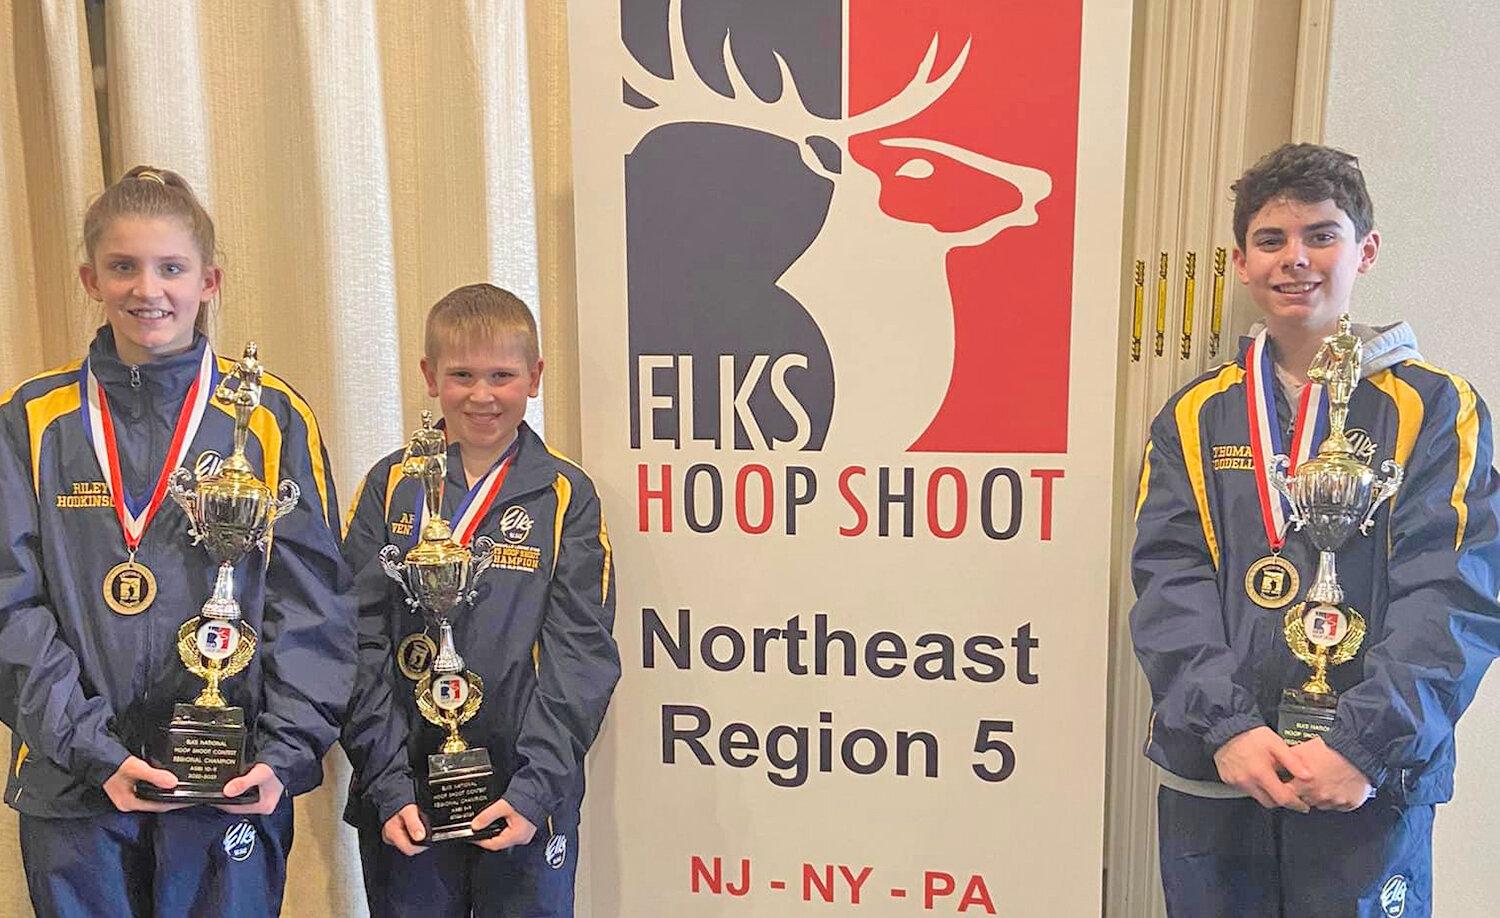 Three local competitors are headed to the national finals for the Elks Hoop Shoot. From left: Riley Hodkinson, a Vernon-Verona-Sherrill student, representing Oneida Lodge in the 10-11 girls division; Armante “Bo” Ventiquattro of the Boonville Lodge in the boys 8-9 age group; and Thomas Goodelle of New Hartford, representing Utica Lodge in the 12-13 boys division.